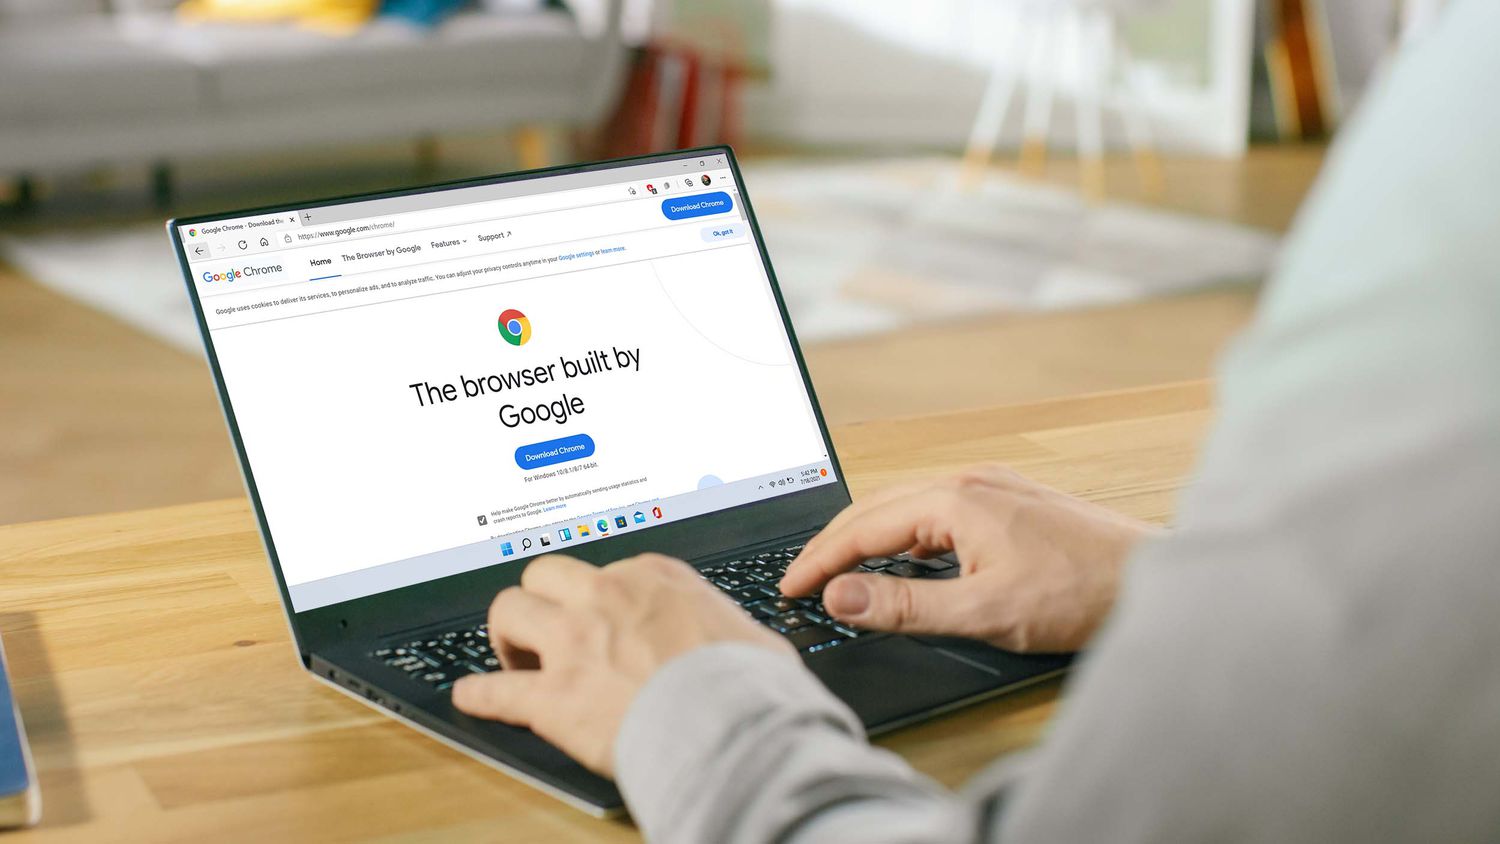 How To Download Google Chrome On Laptop